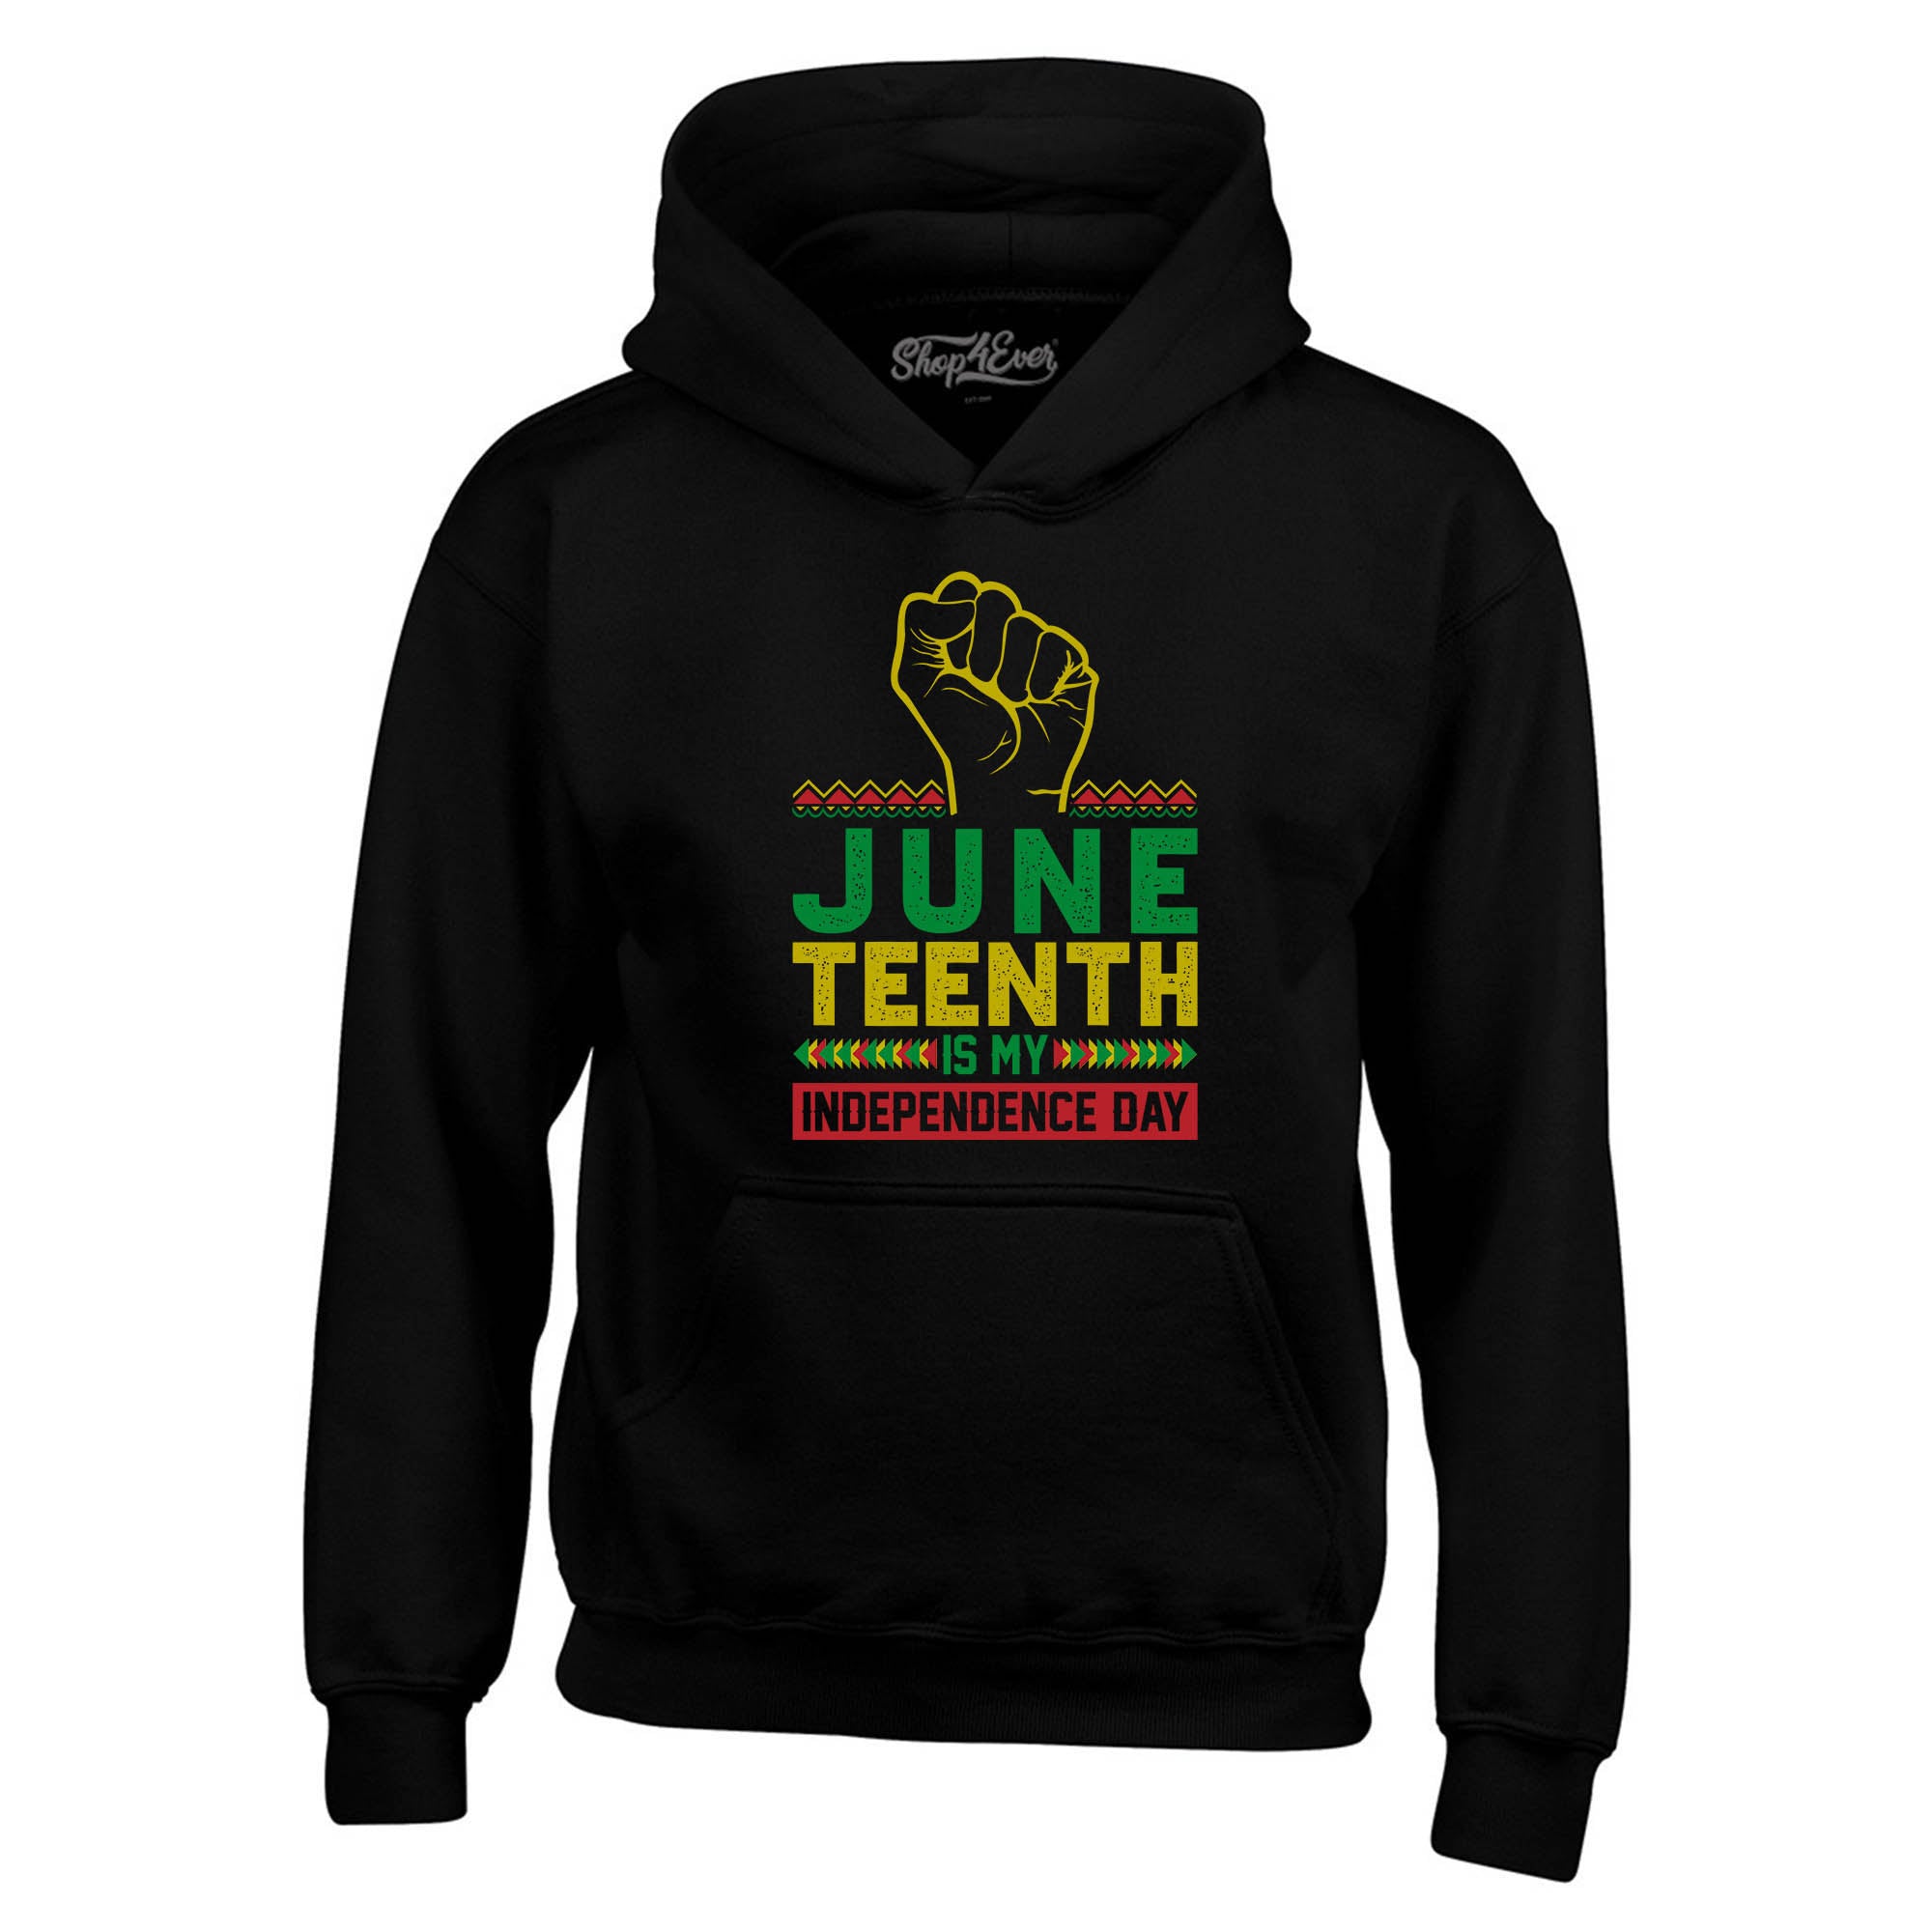 Juneteenth is My Independence Day June 19th 1865 Hoodie Sweatshirts